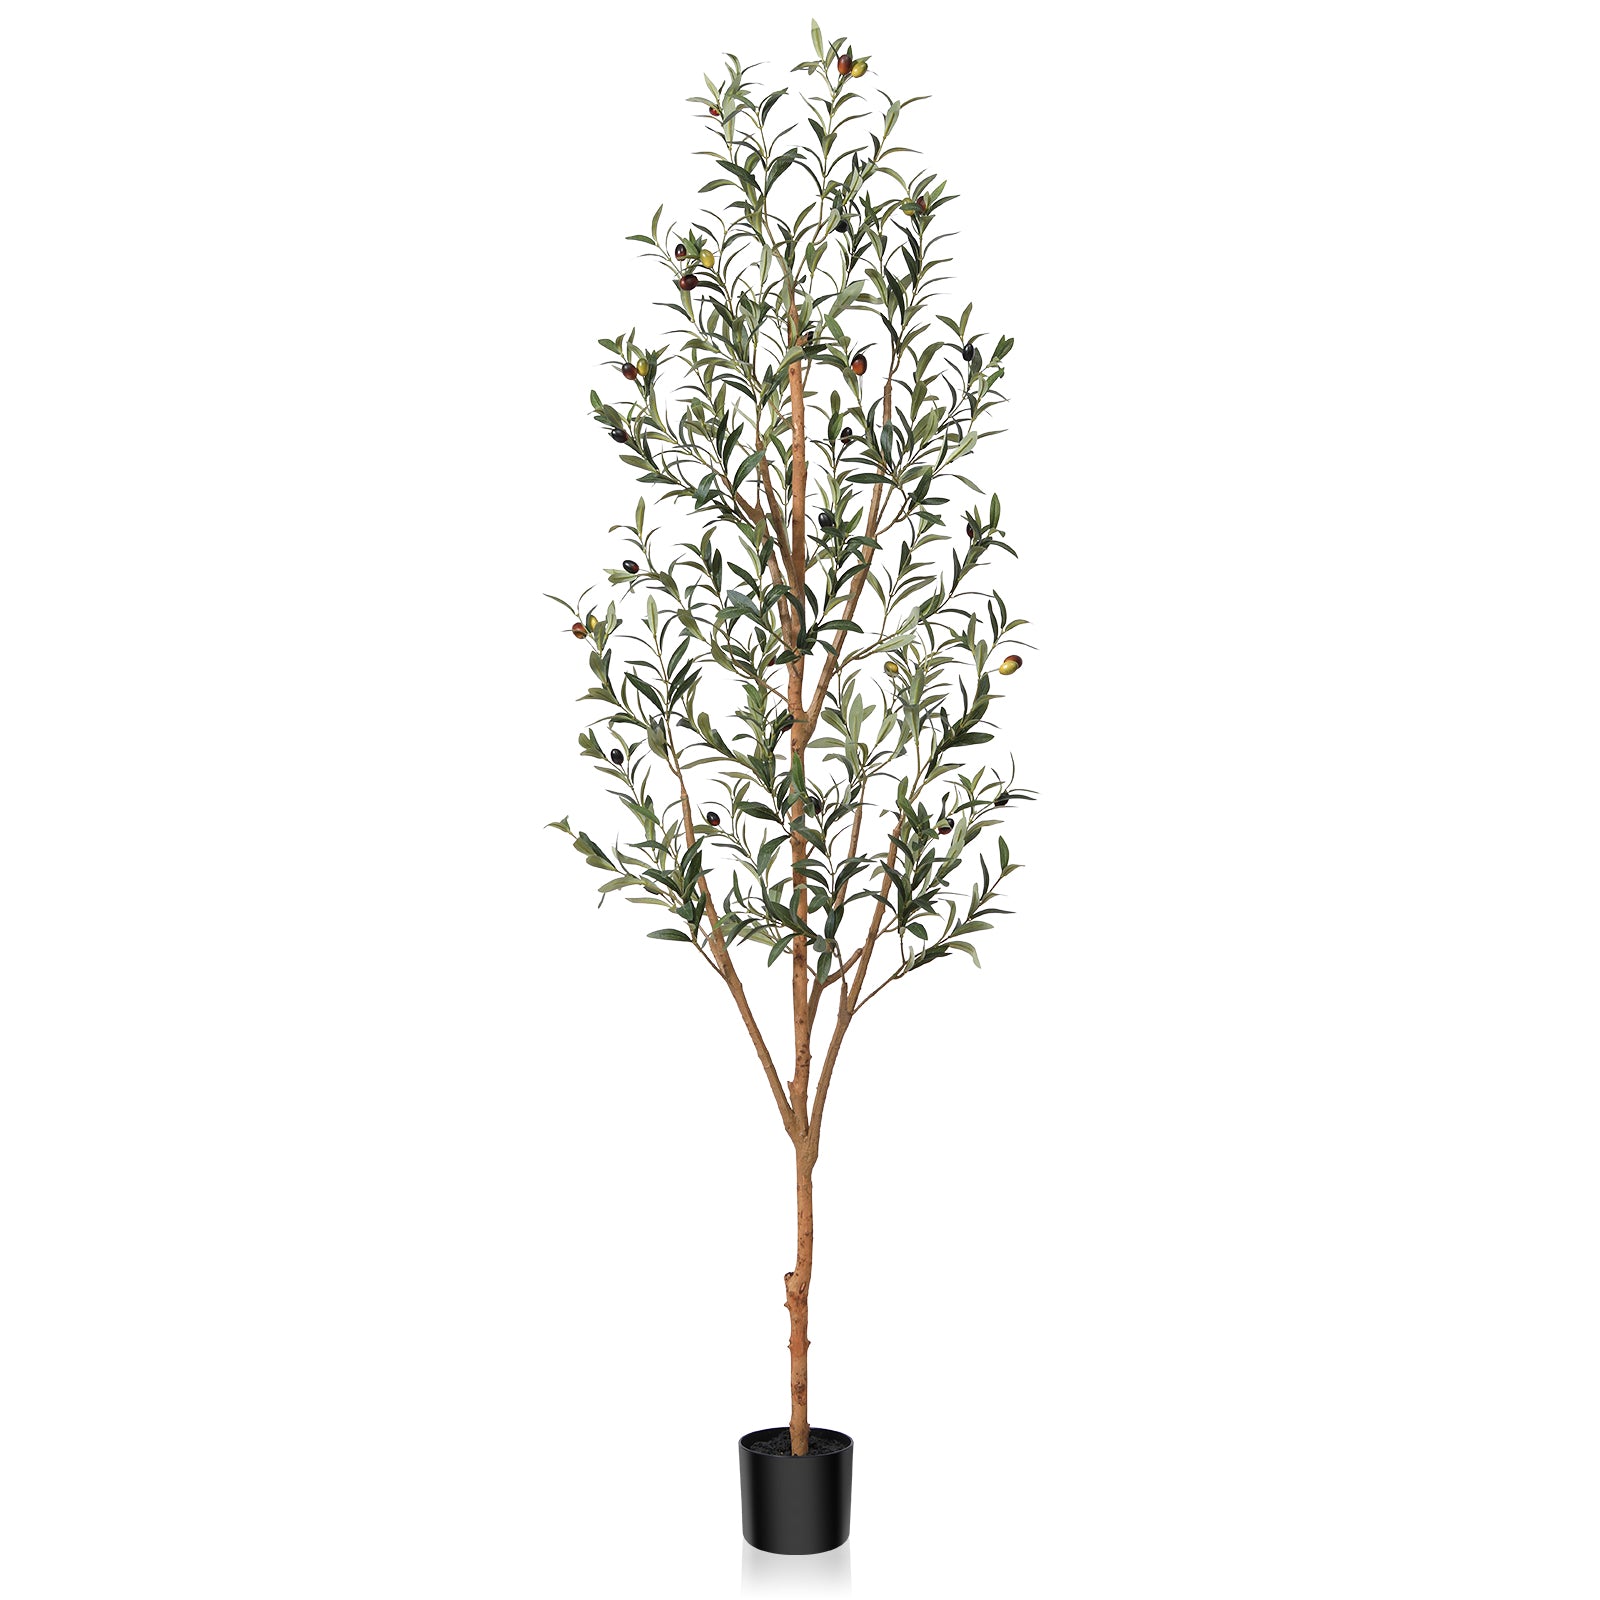 Kazeila Artificial Olive Tree 6FT Tall Faux Silk Plant for Home Office